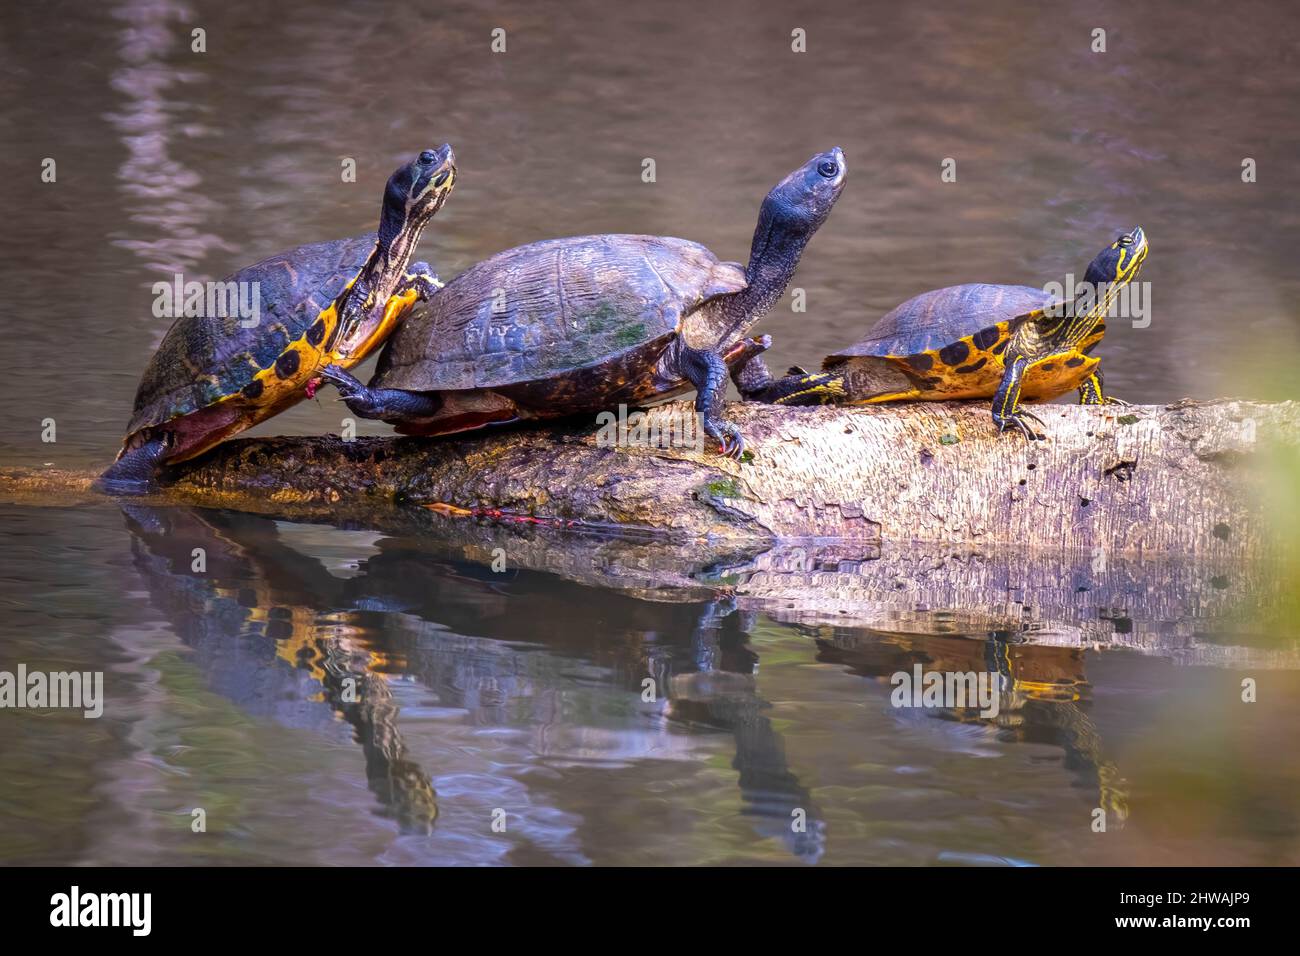 A trio of Eastern River Cooters  (Pseudemys concinna ssp. concinna) bask in the sun. Garner, North Carolina. Stock Photo